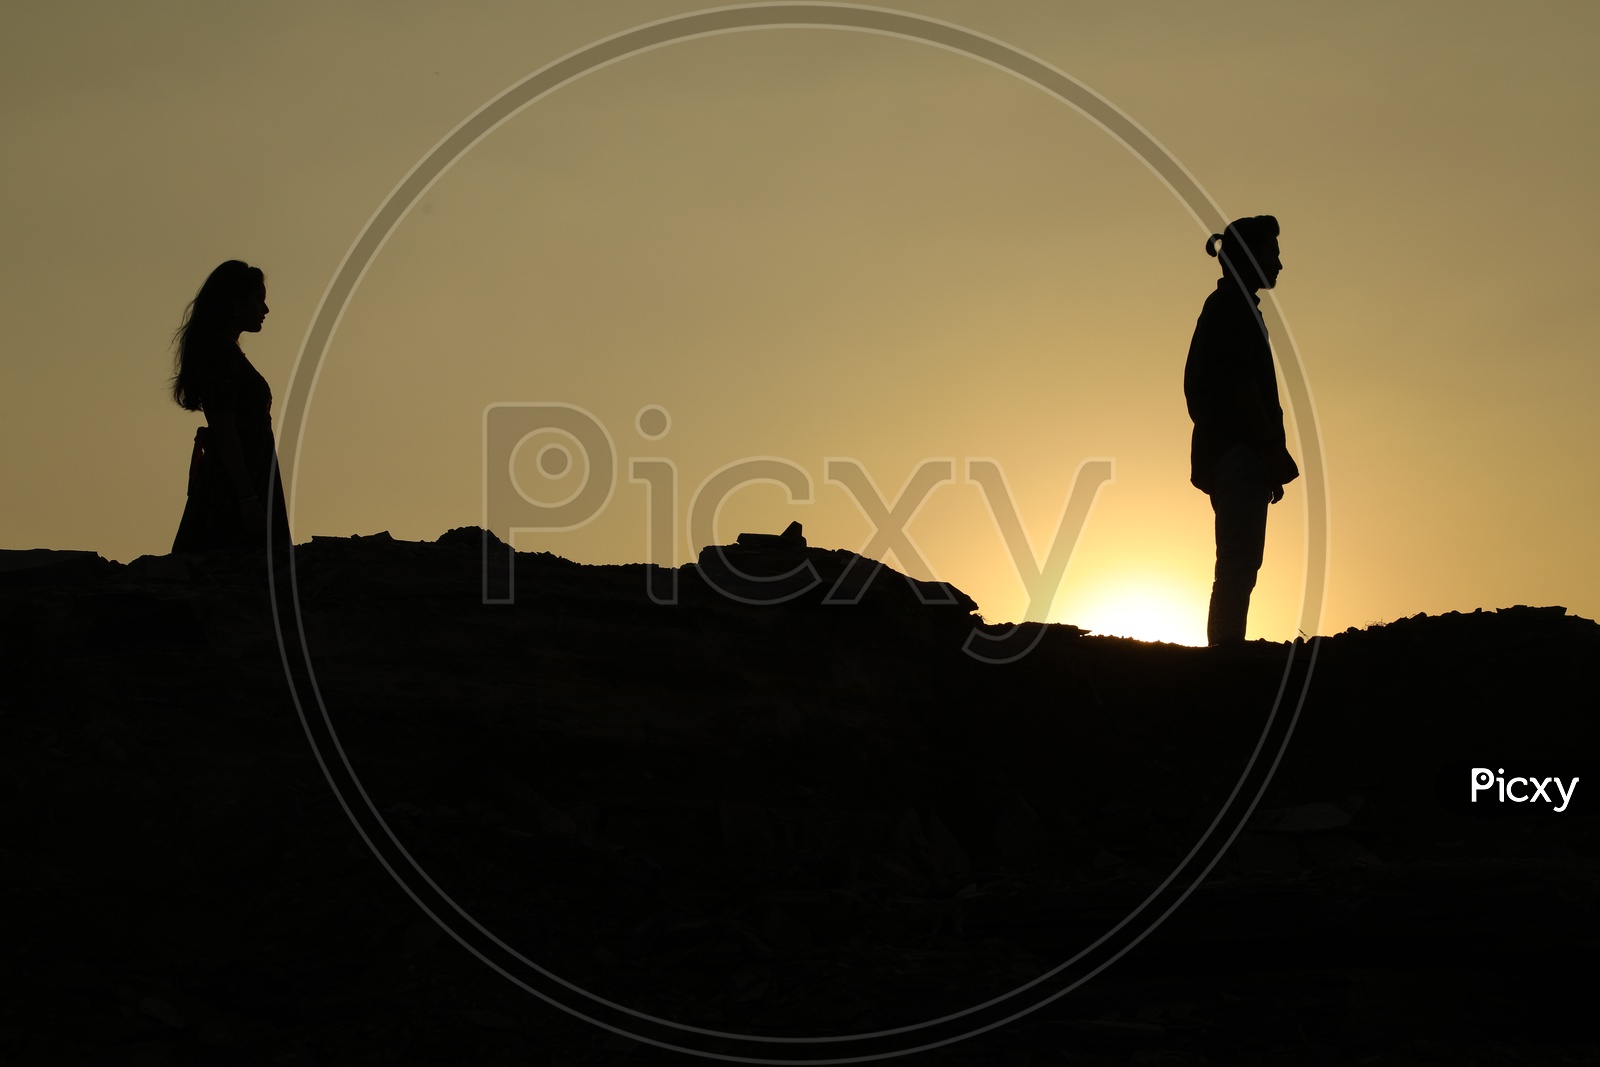 Silhouette of man and woman on the top of the rocky hill